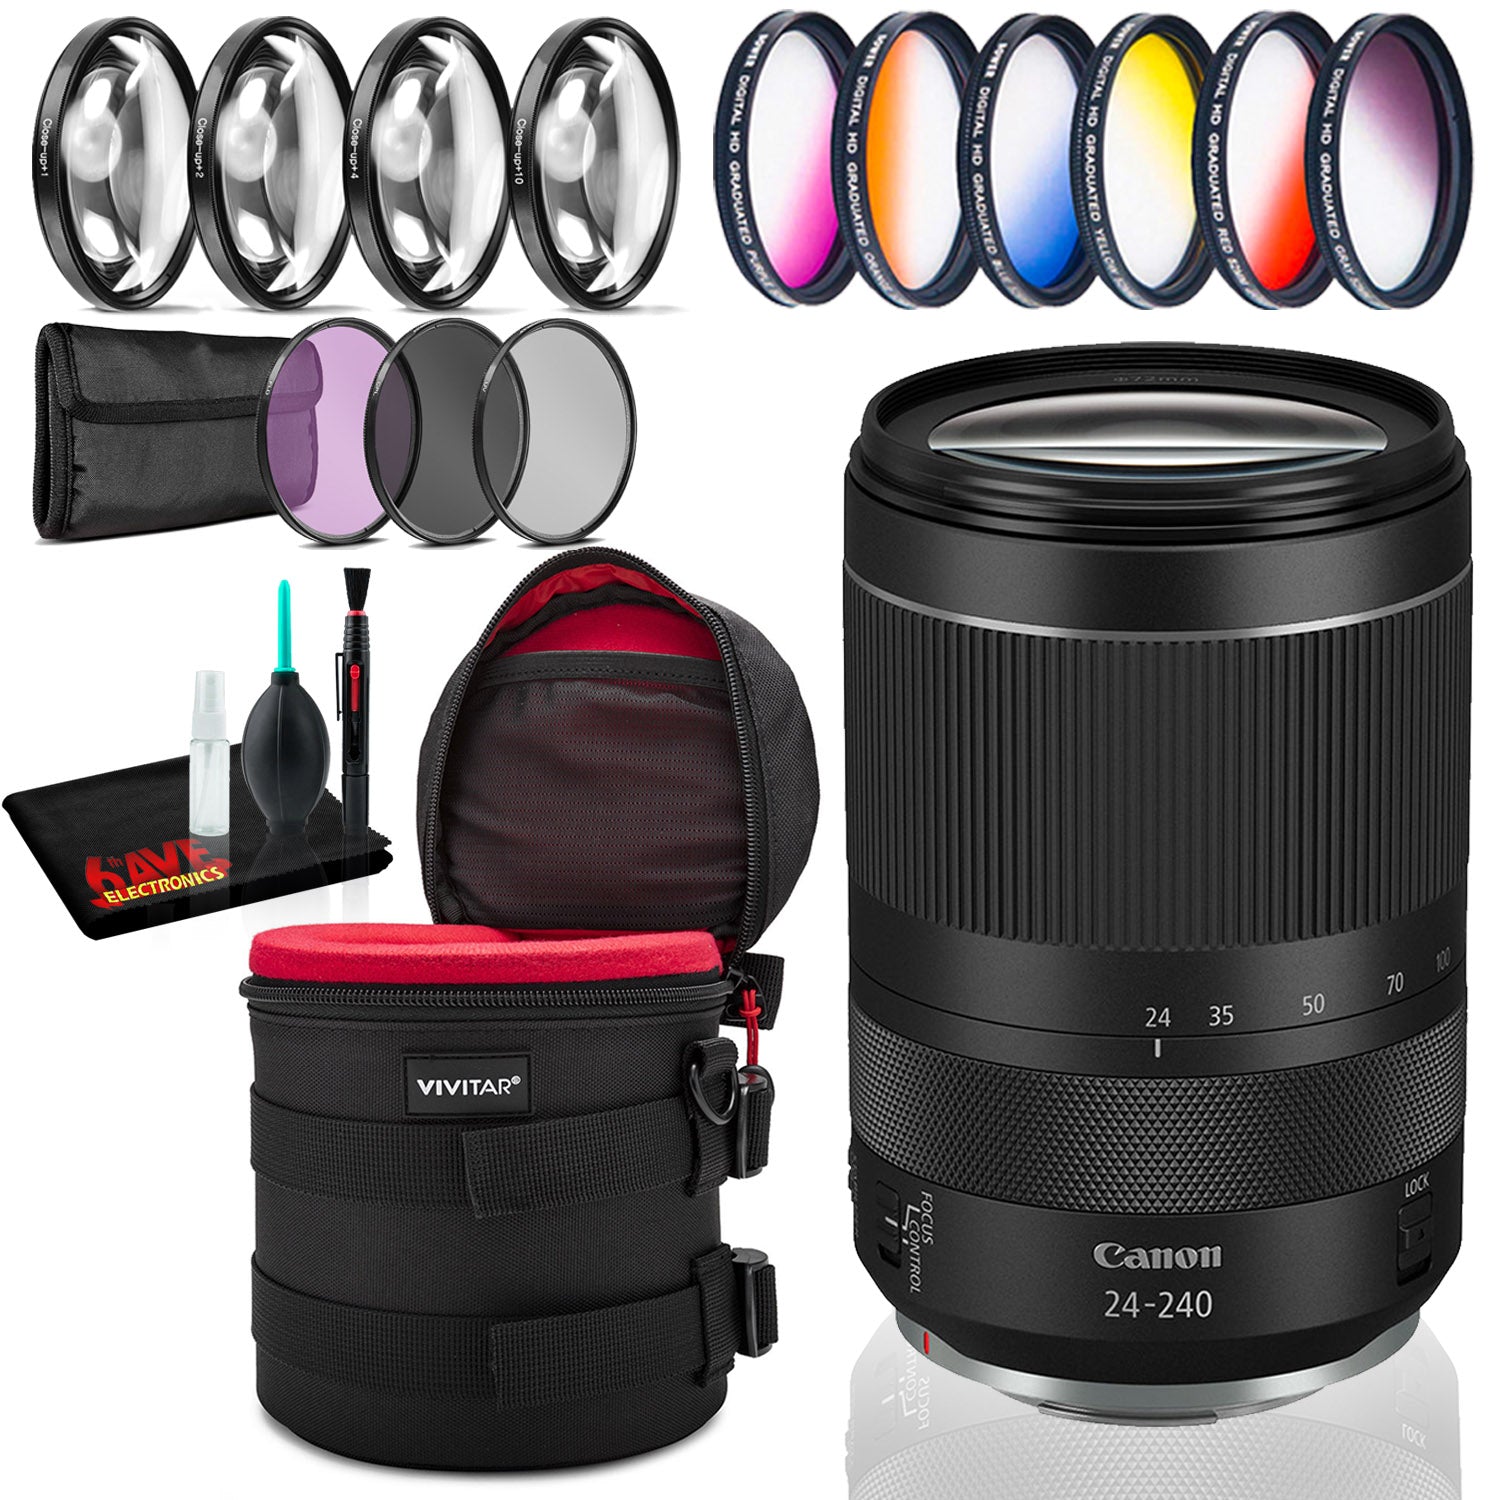 Canon RF 24-240mm f/4-6.3 IS USM Lens (Intl Model) with Lens Case and Filters Bundle